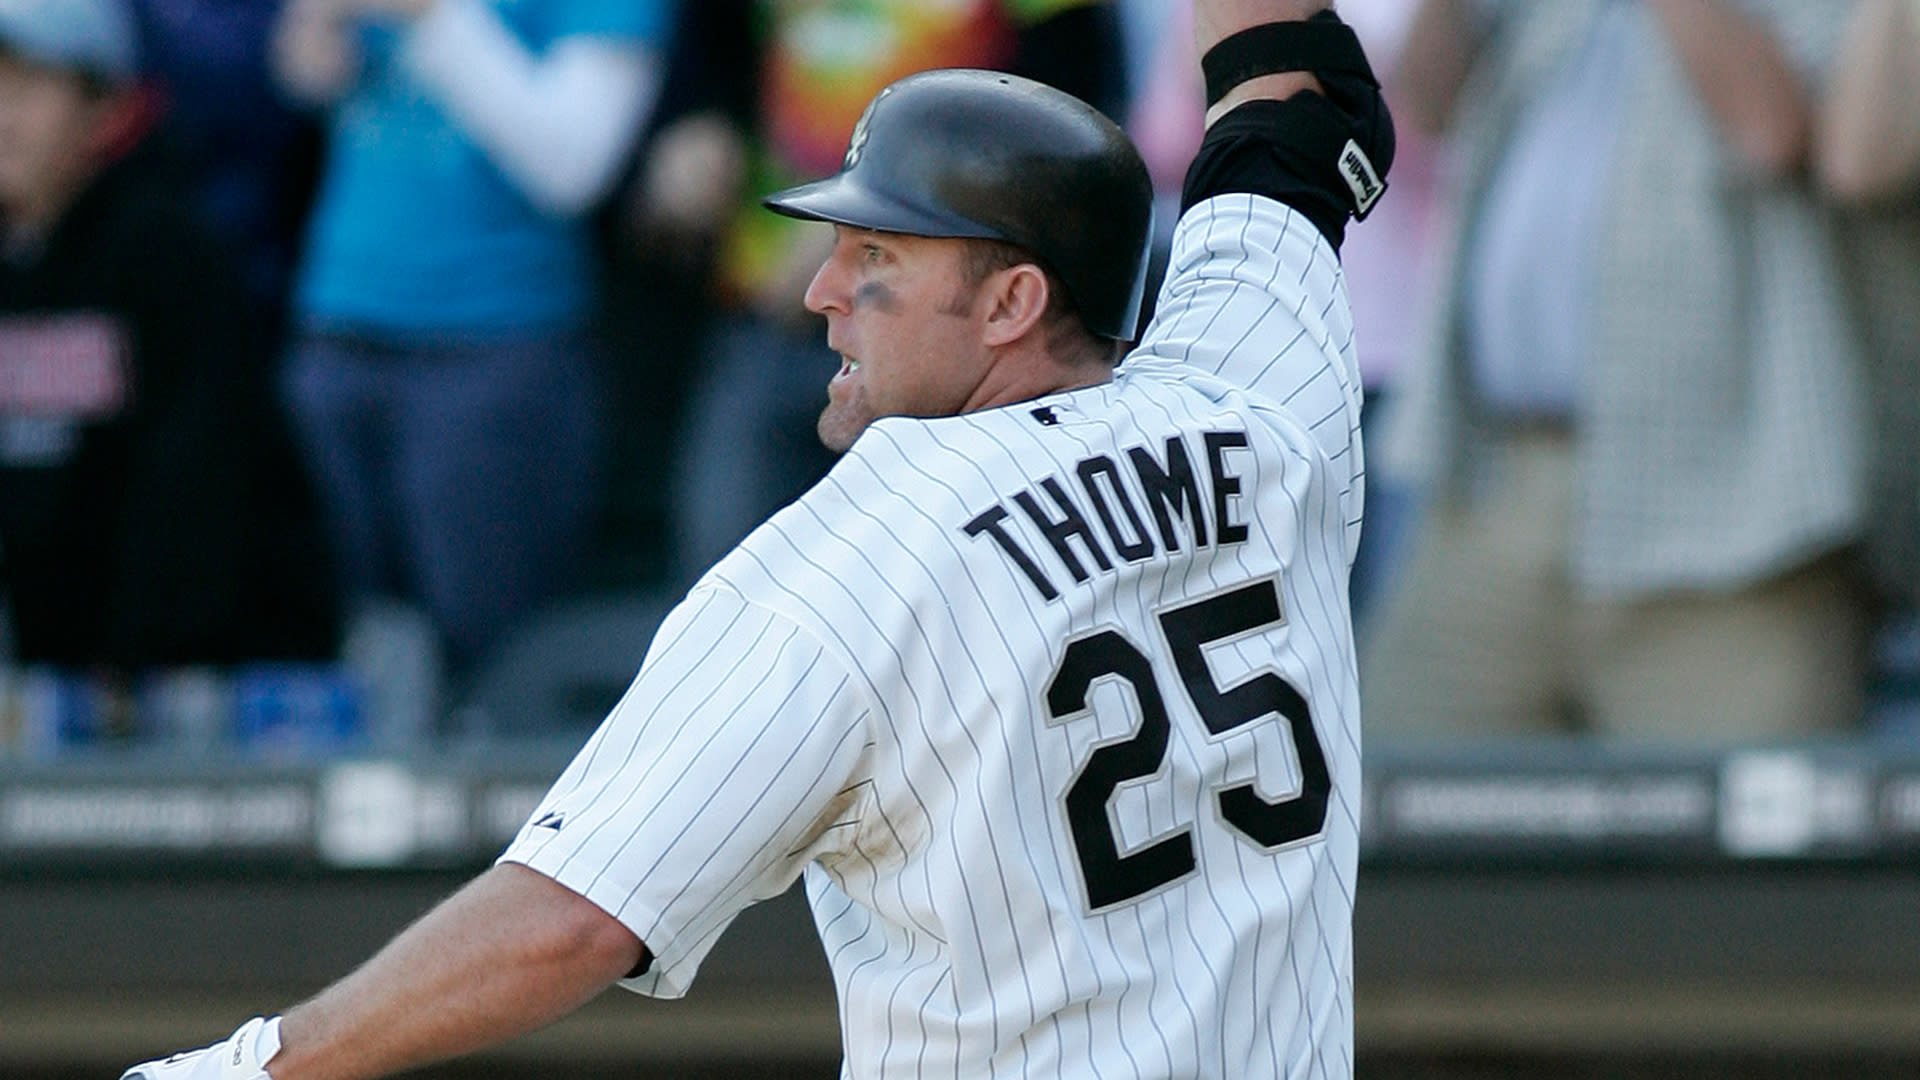 jim thome hall of fame jersey